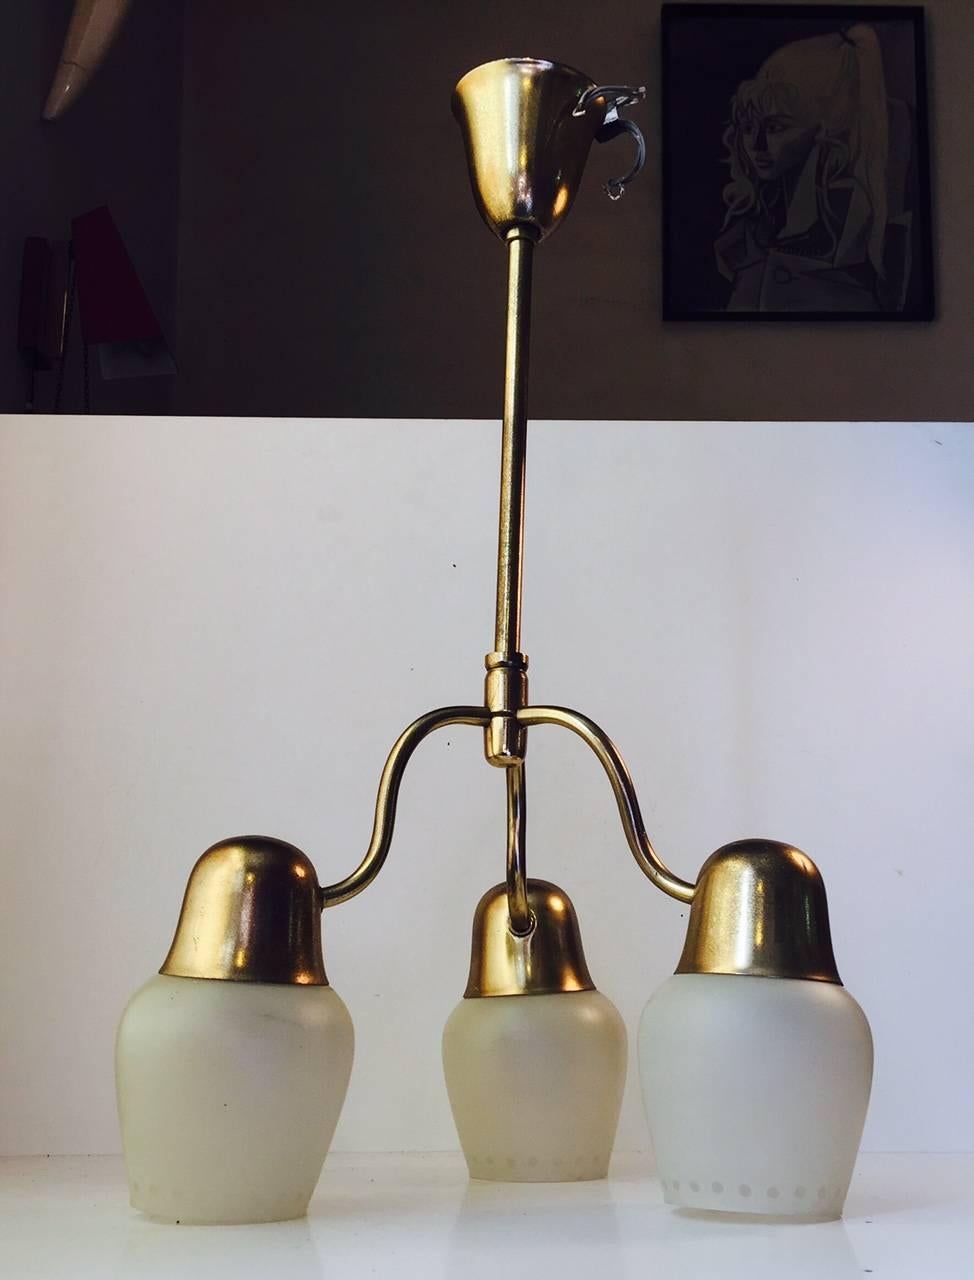 A round brass ceiling light with three dotted opaline glass shades. It features organic shapes and curves and was manufactured by ASEA in Sweden during the 1940s or early 1950s in a style reminiscent of Paavo Tynell Bergstrom and Vilhelm Lauritzen.